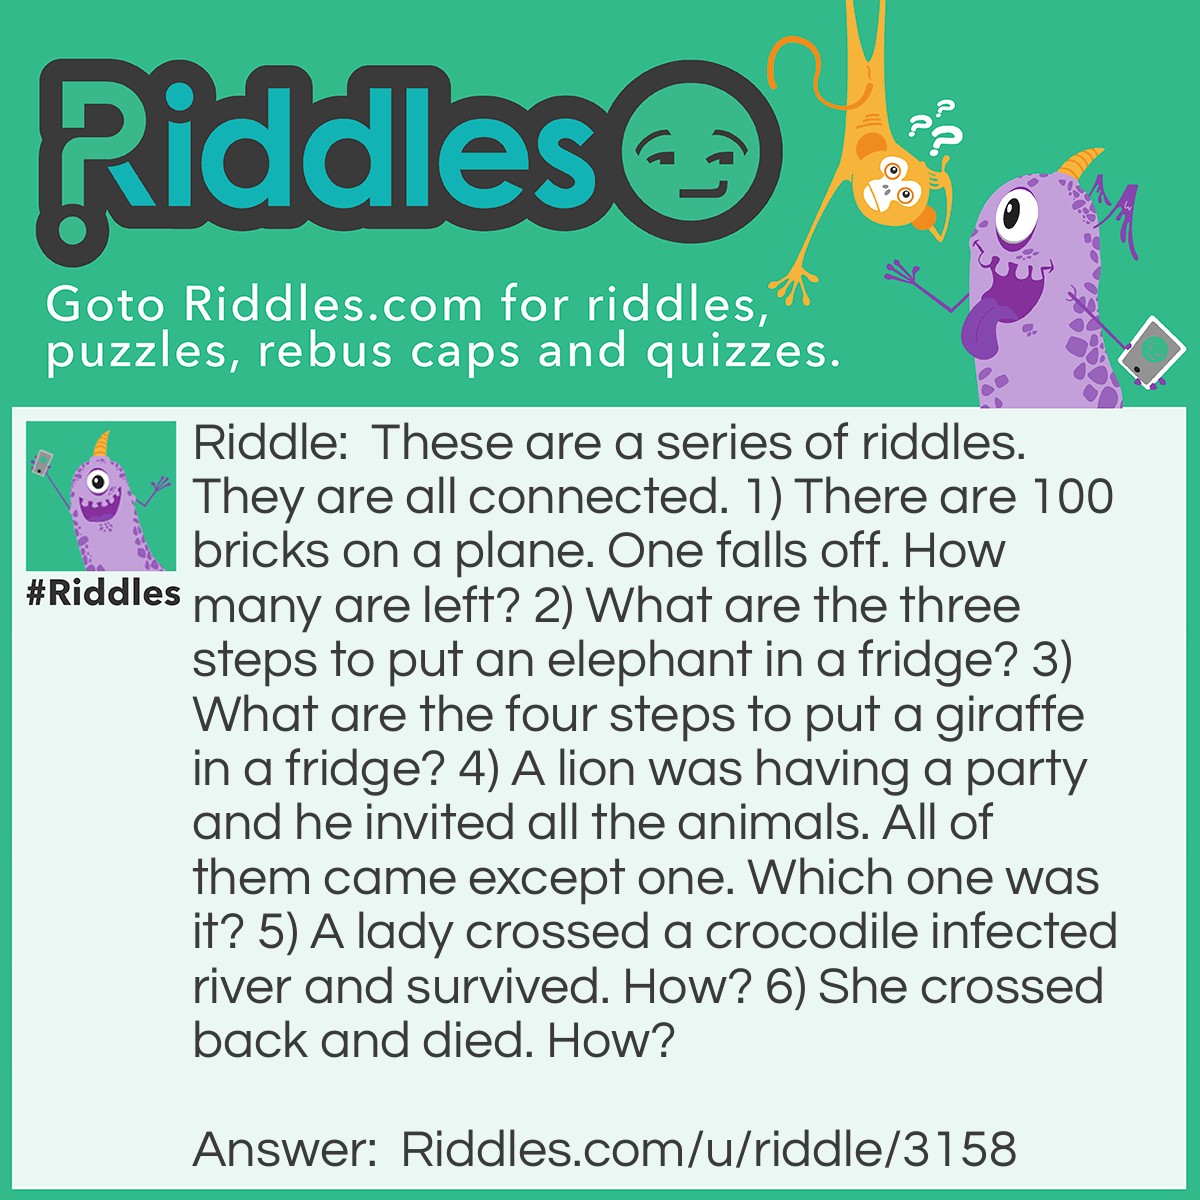 Riddle: These are a series of <a href="https://www.riddles.com">riddles</a>. They are all connected. 1) There are 100 bricks on a plane. One falls off. How many are left? 2) What are the three steps to put an elephant in a fridge? 3) What are the four steps to put a giraffe in a fridge? 4) A lion was having a party and he invited all the animals. All of them came except one. Which one was it? 5) A lady crossed a crocodile infected river and survived. How? 6) She crossed back and died. How? Answer: 1) 99 2) Open the door, put the elephant in, close the door. 3) Open the door, take the elephant out, put the giraffe in, close the door. 4) The giraffe. It was in the fridge. 5) The crocodiles were at the party. 6) The brick from the plane hit her in the head.